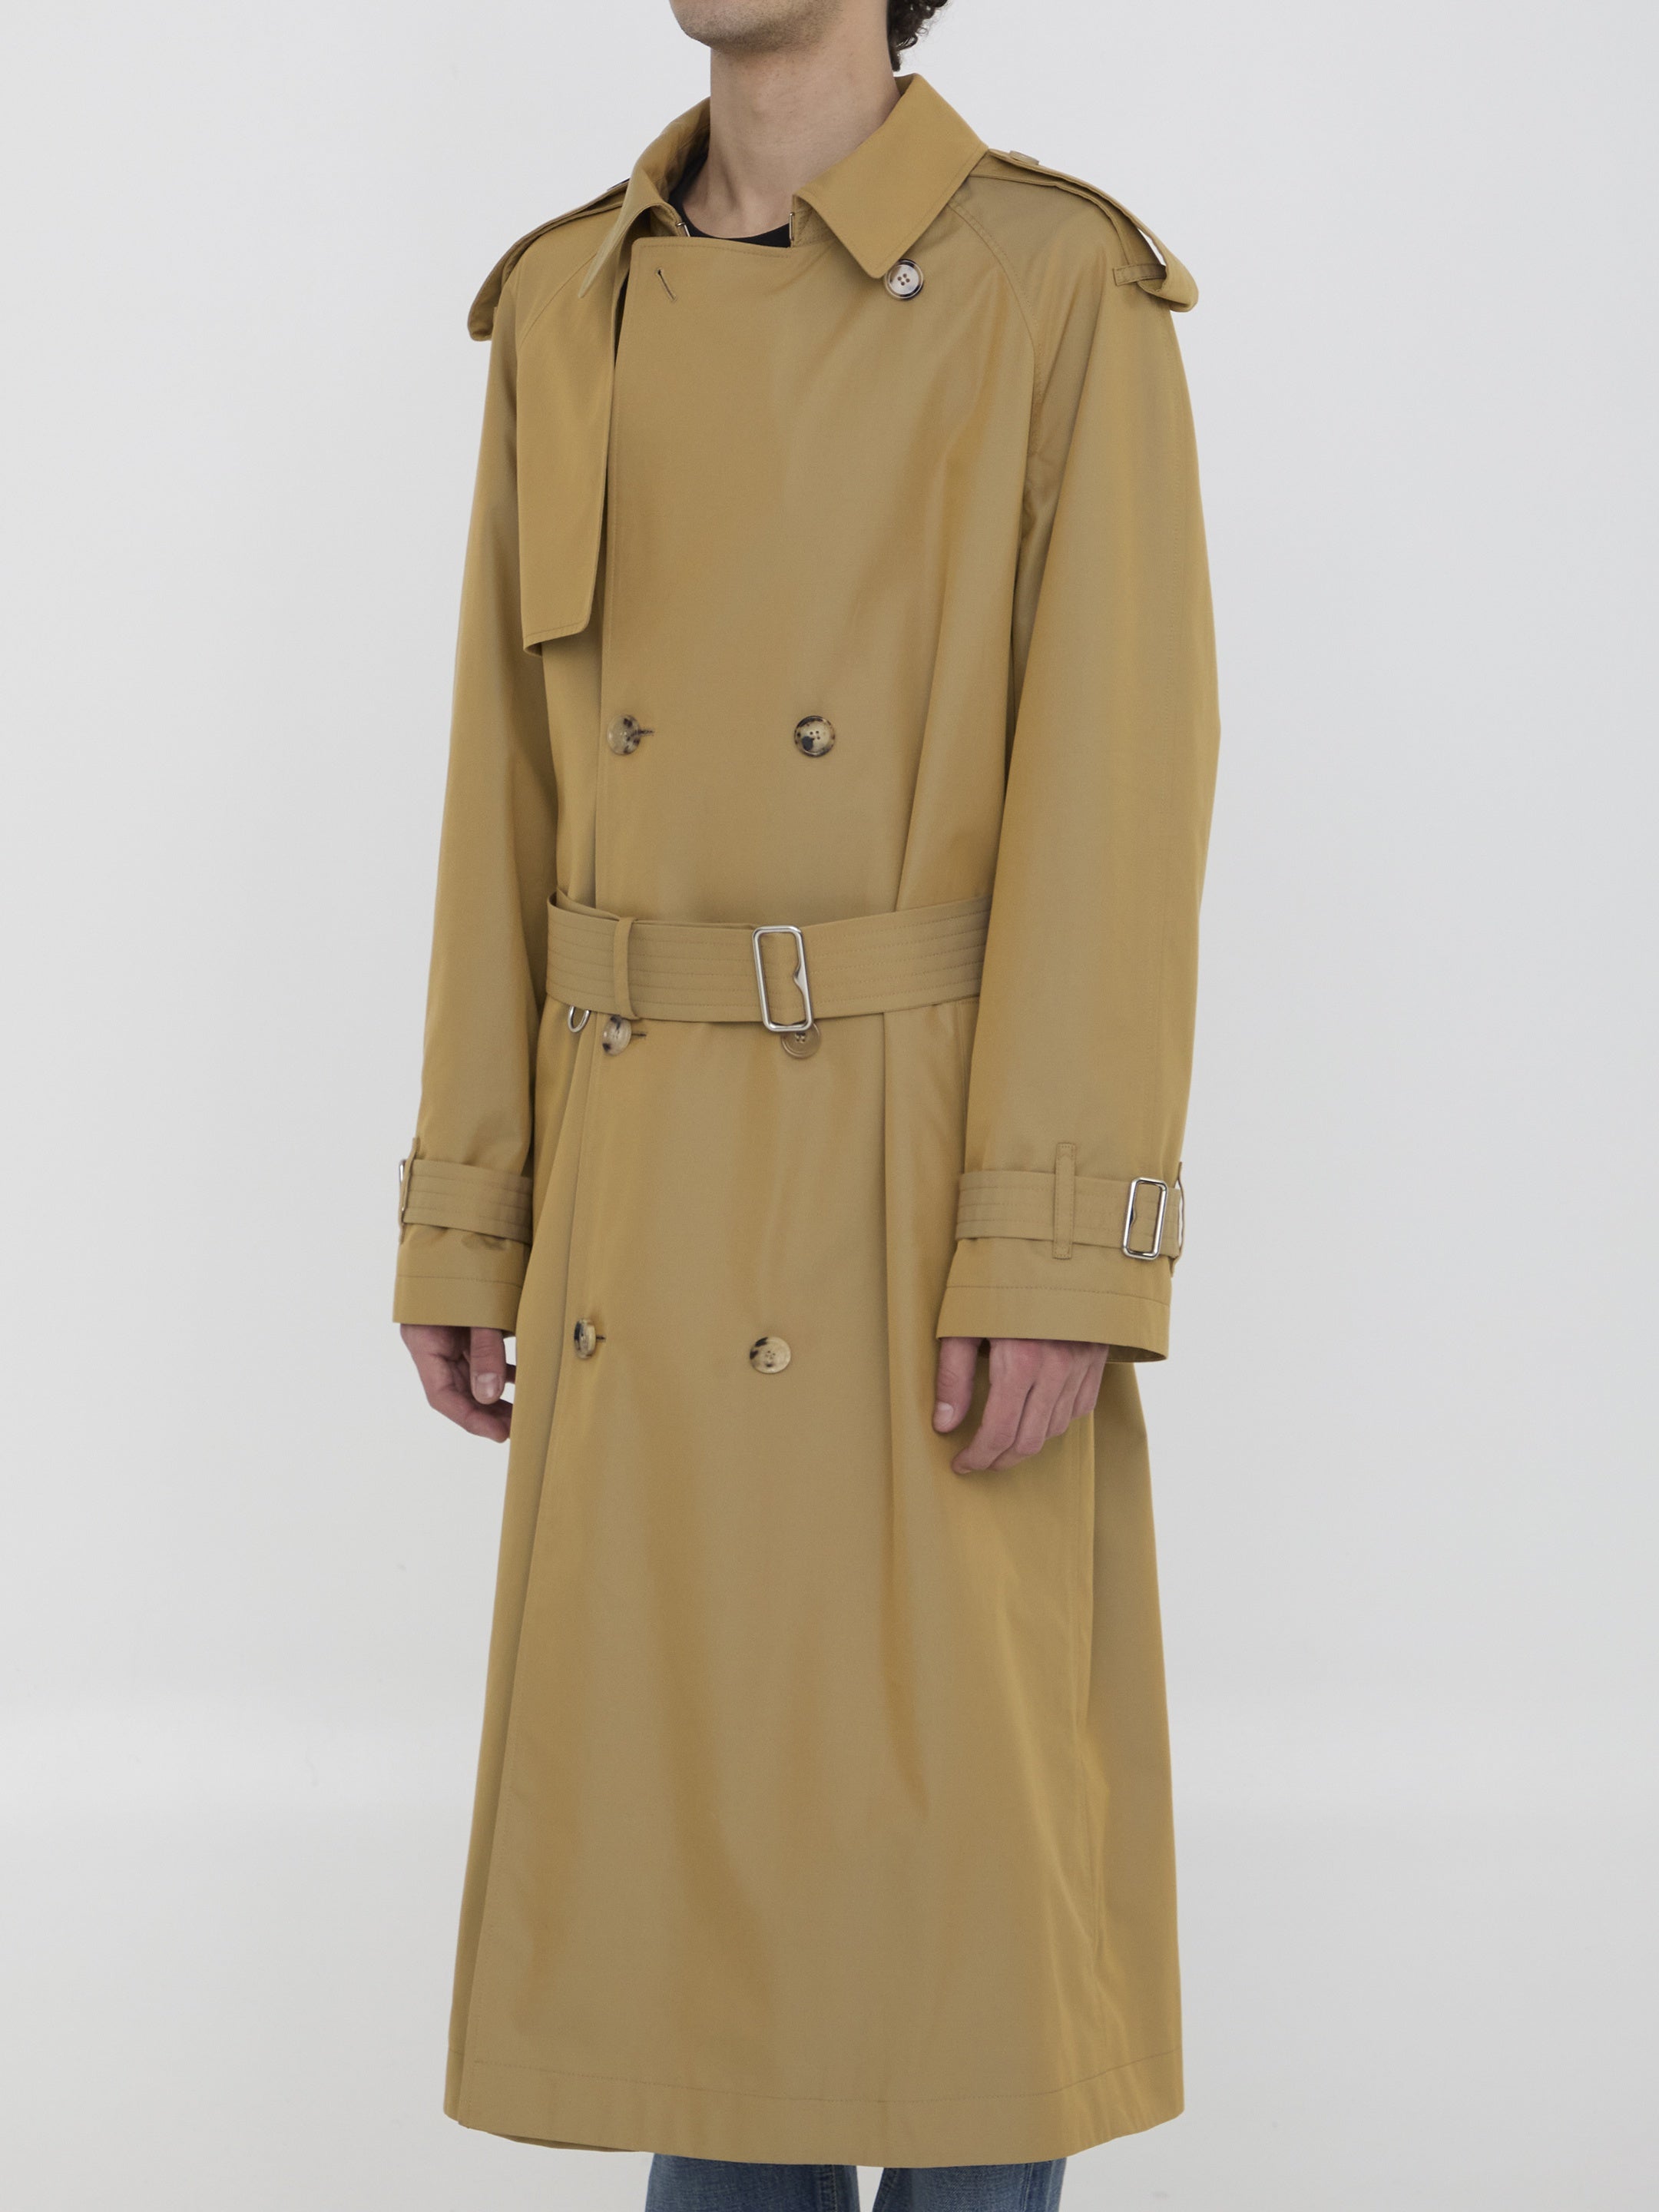 BURBERRY-OUTLET-SALE-Gabardine-long-trench-coat-Jacken-Mantel-ARCHIVE-COLLECTION-2.jpg